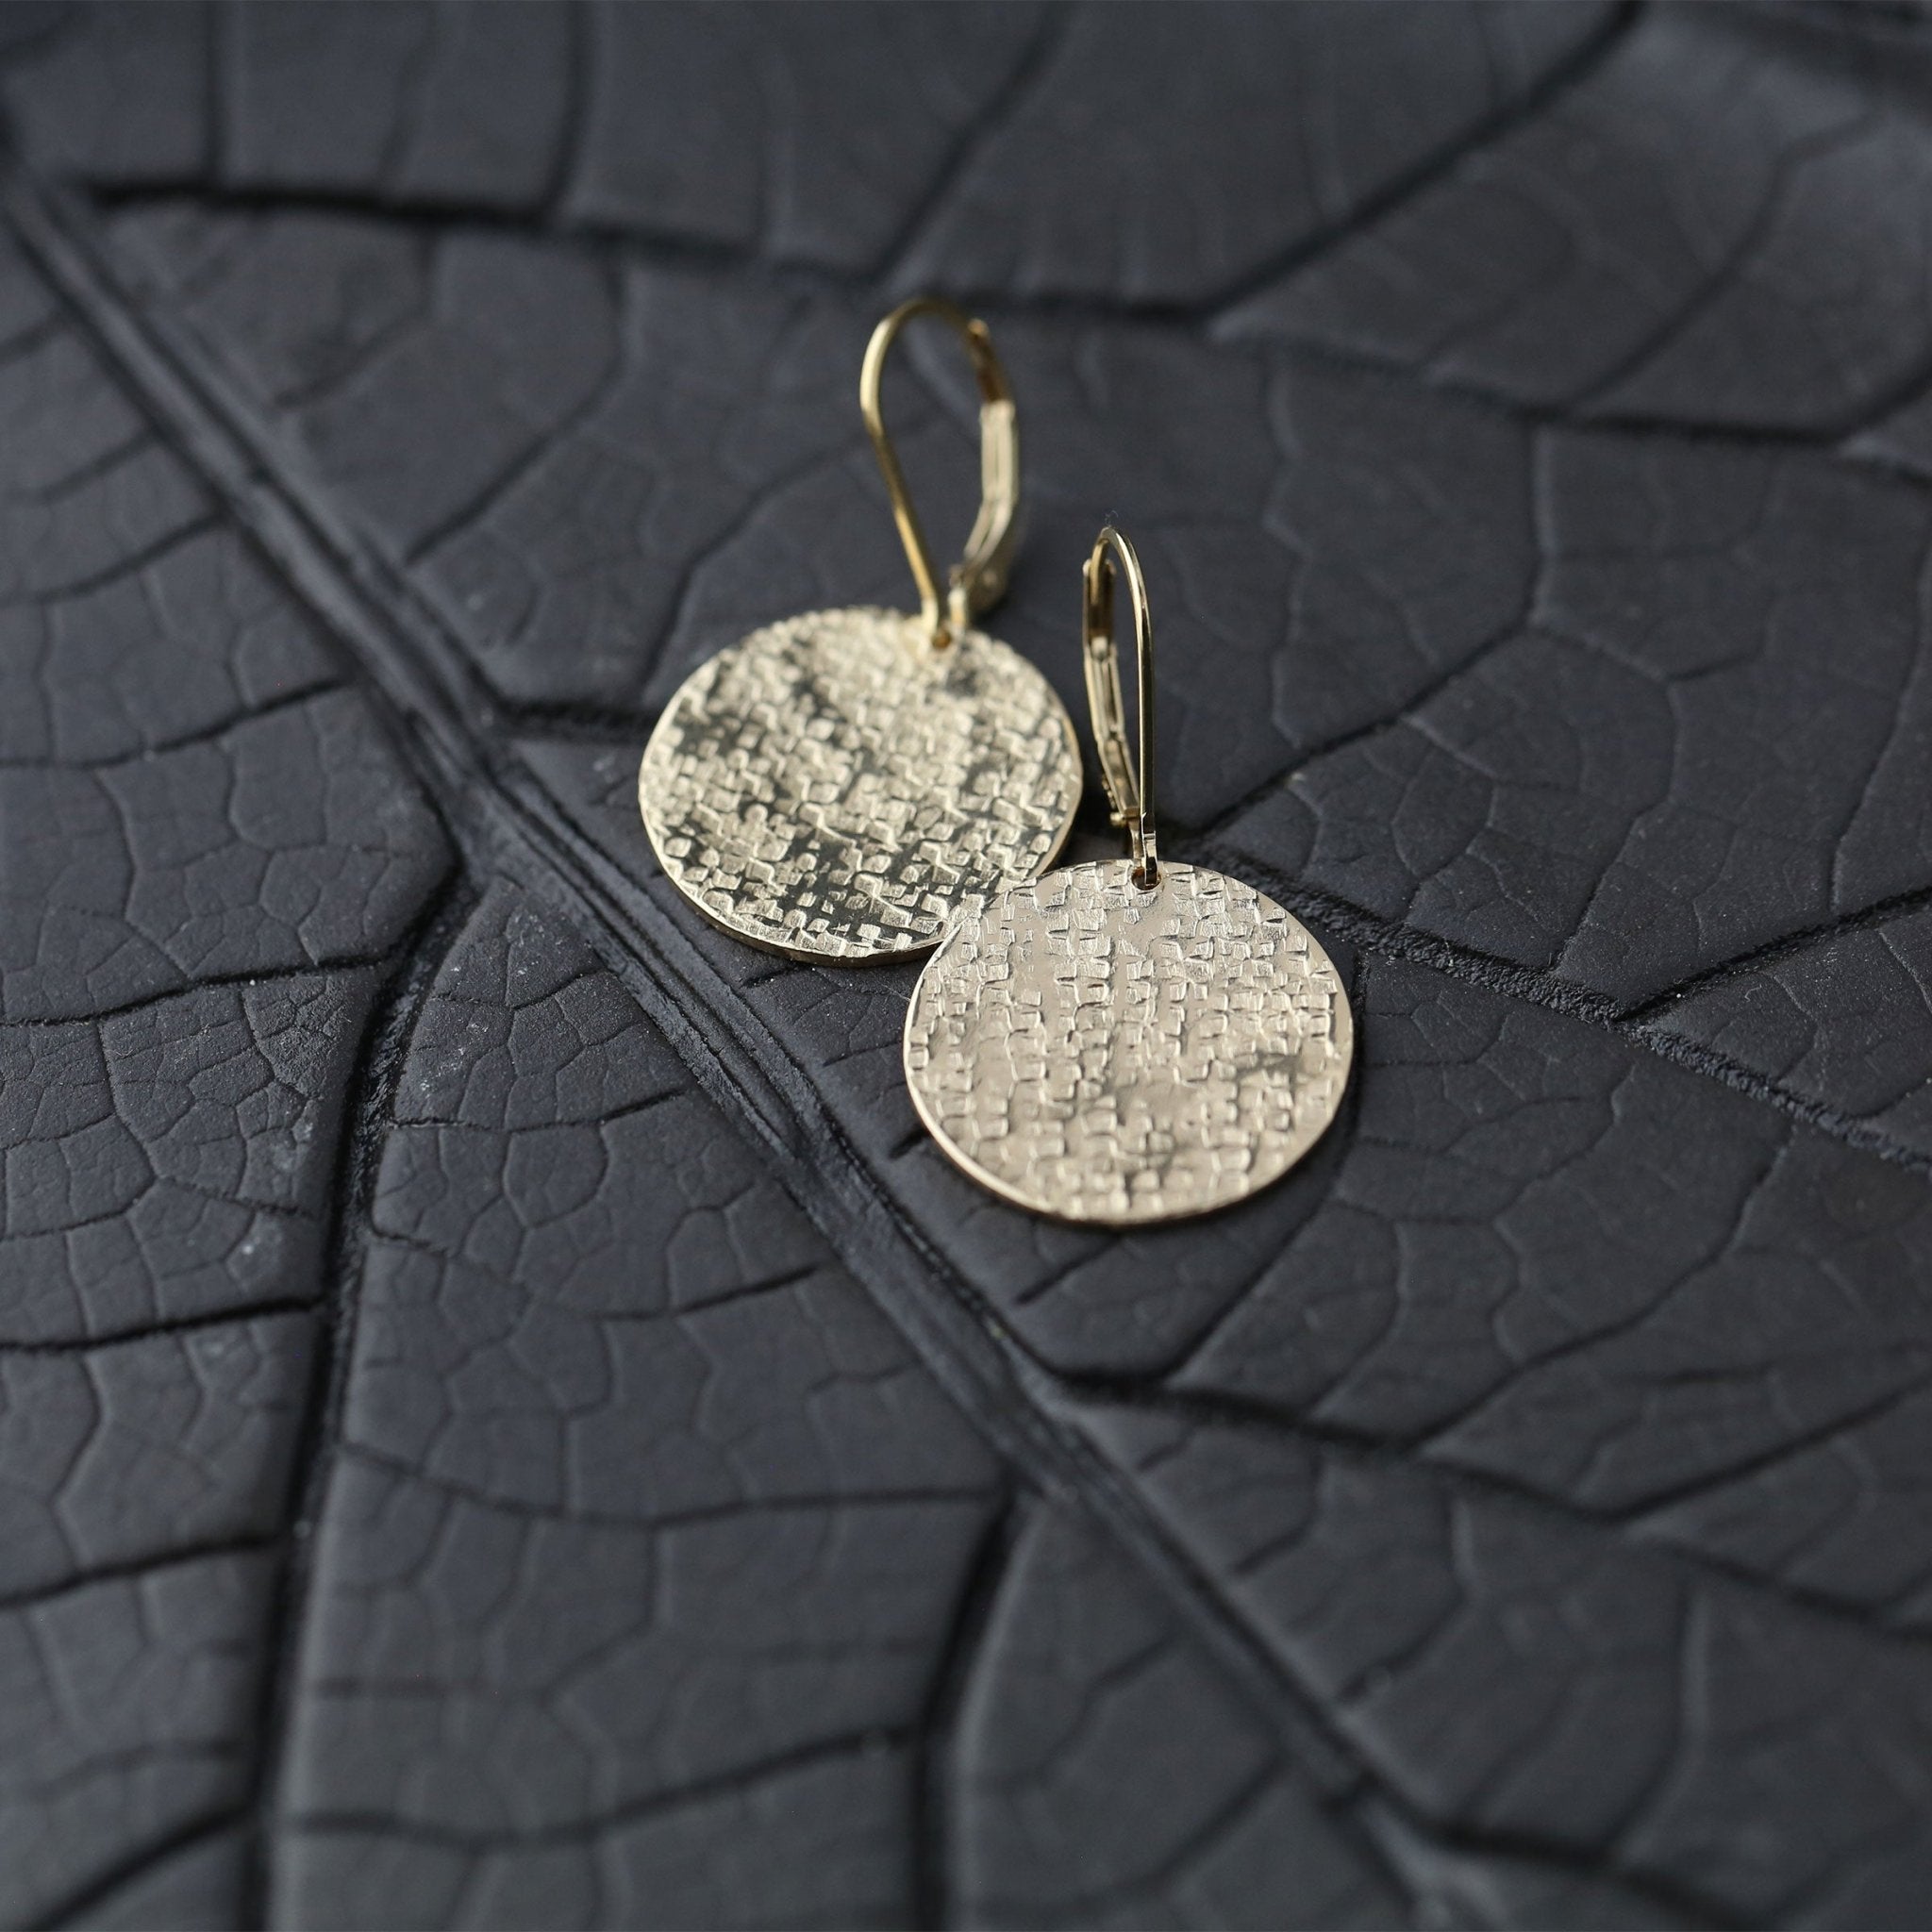 Large Raw Silk Texture Gold Disc Lever-back Earrings